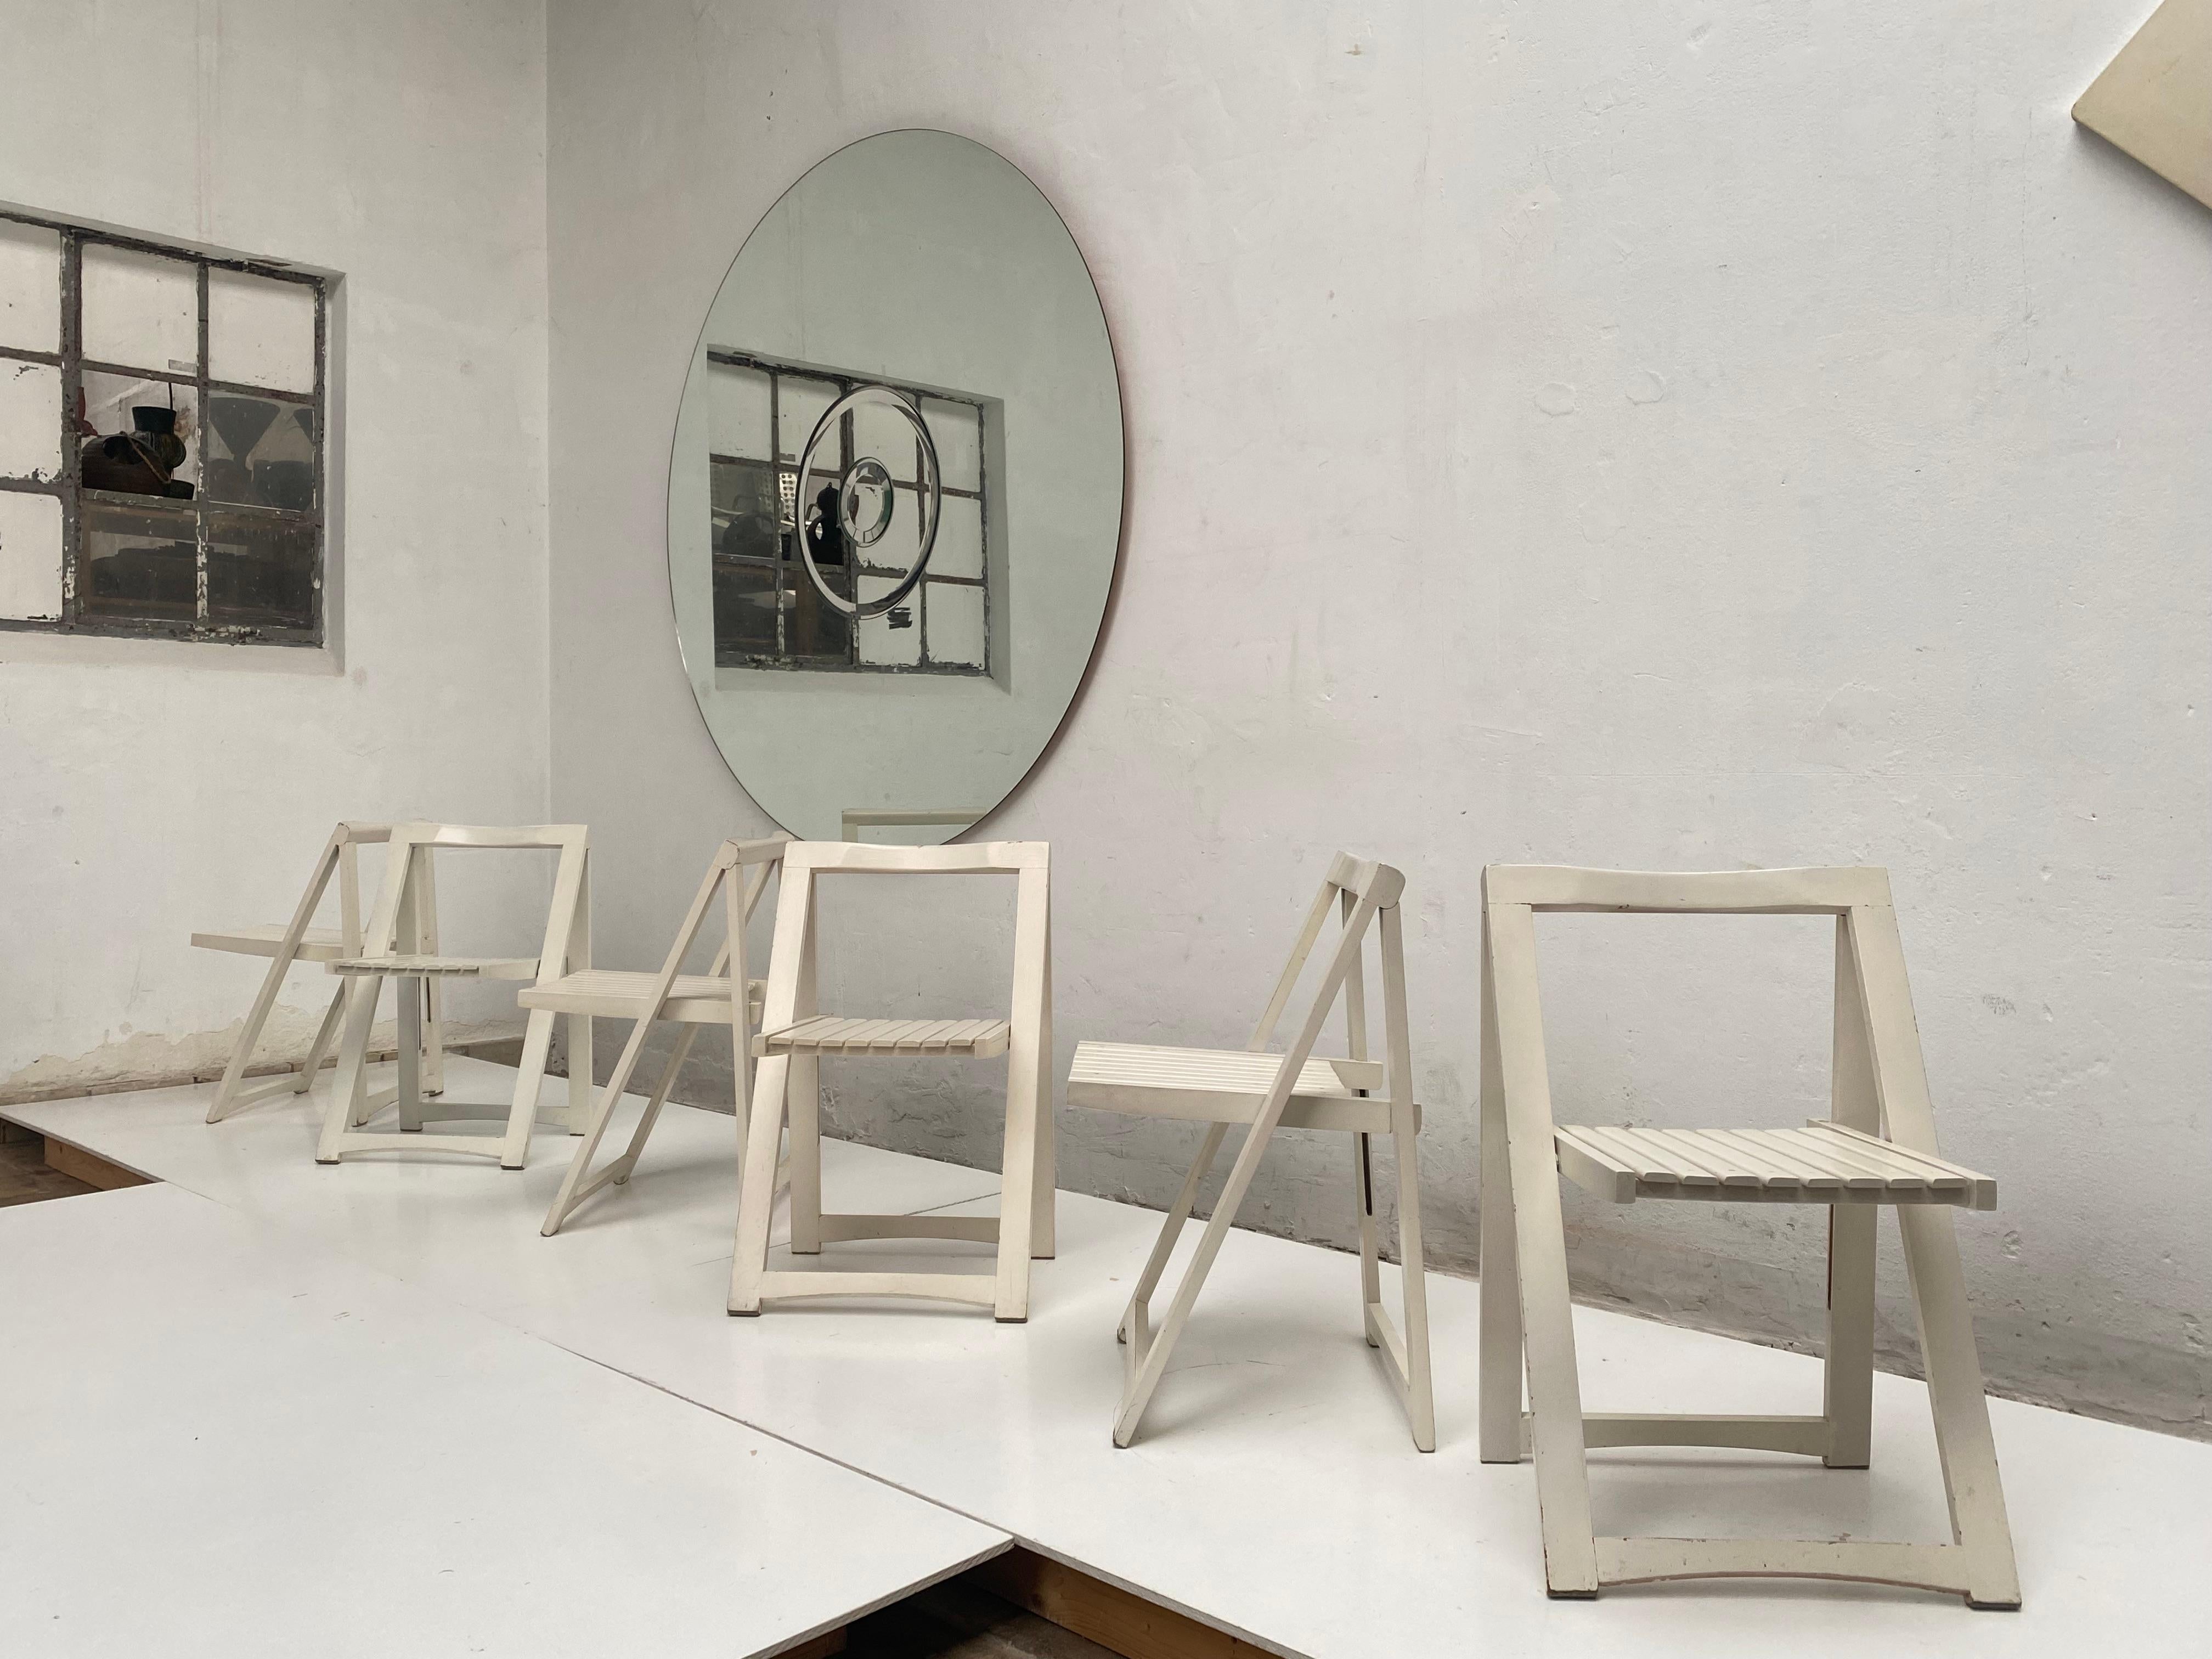 Mid-20th Century 6 White Folding Chairs Attributed to Aldo Jacober for Alberto Bazzani Italy 1966 For Sale